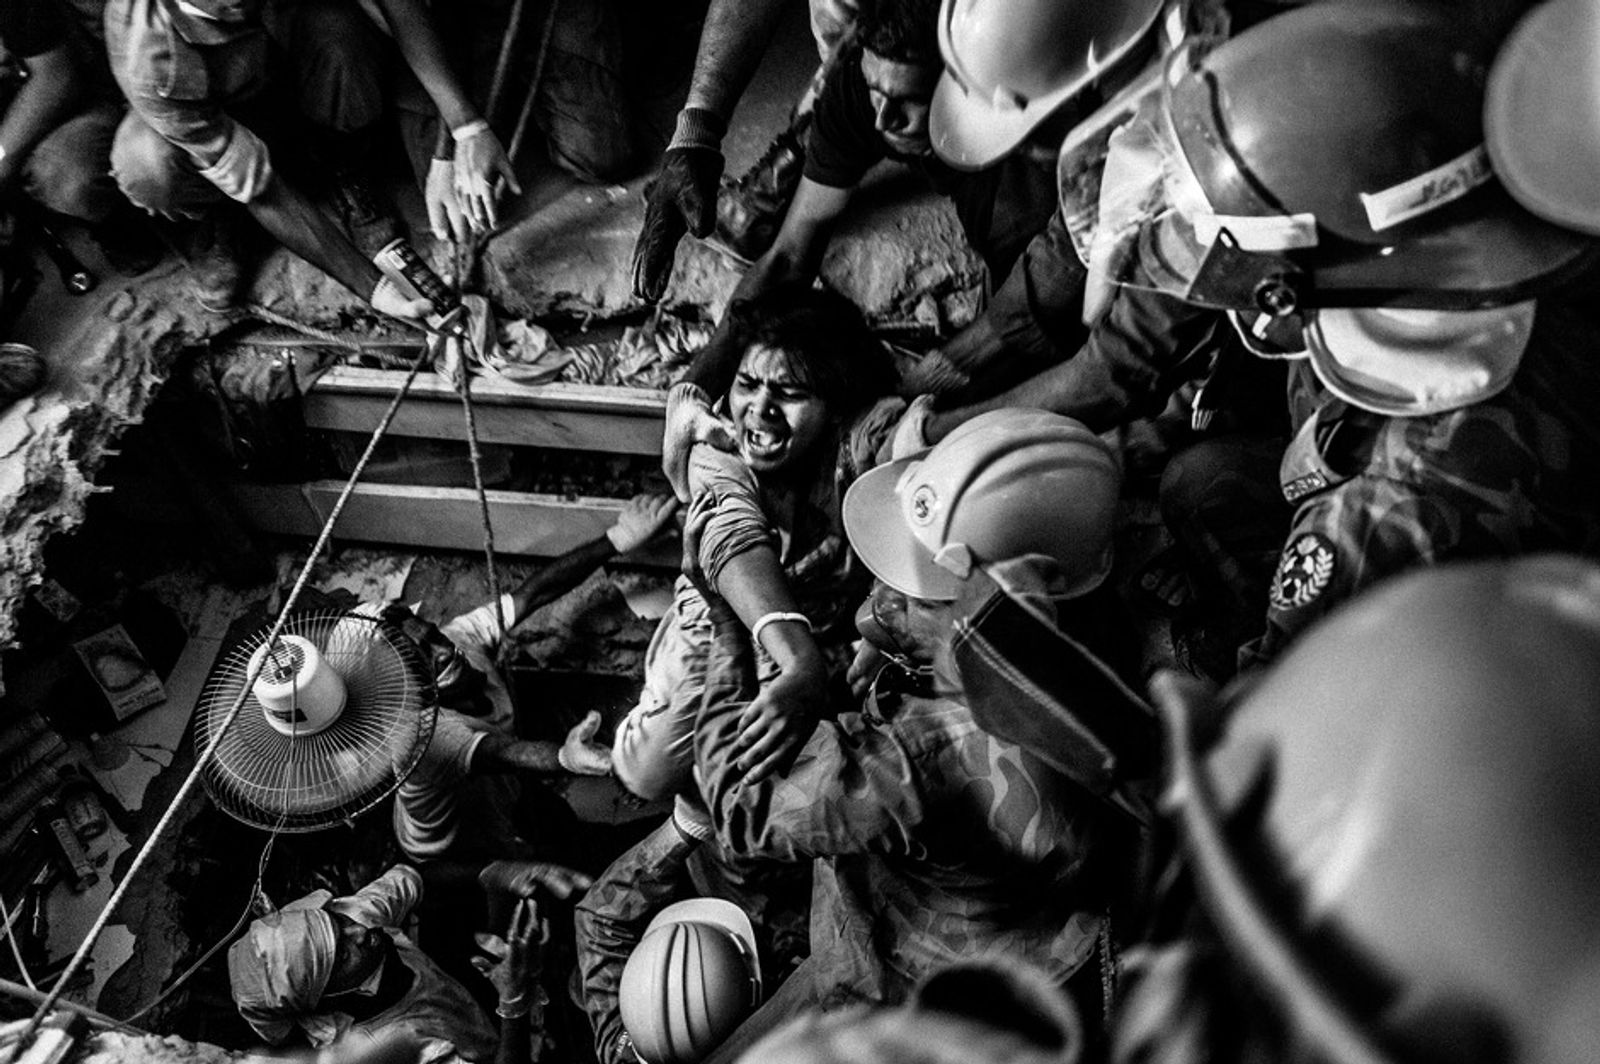 © Rahul Talukder - A rescued worker screams at the first sight of light after being trapped for 73 hours inside the rubble.